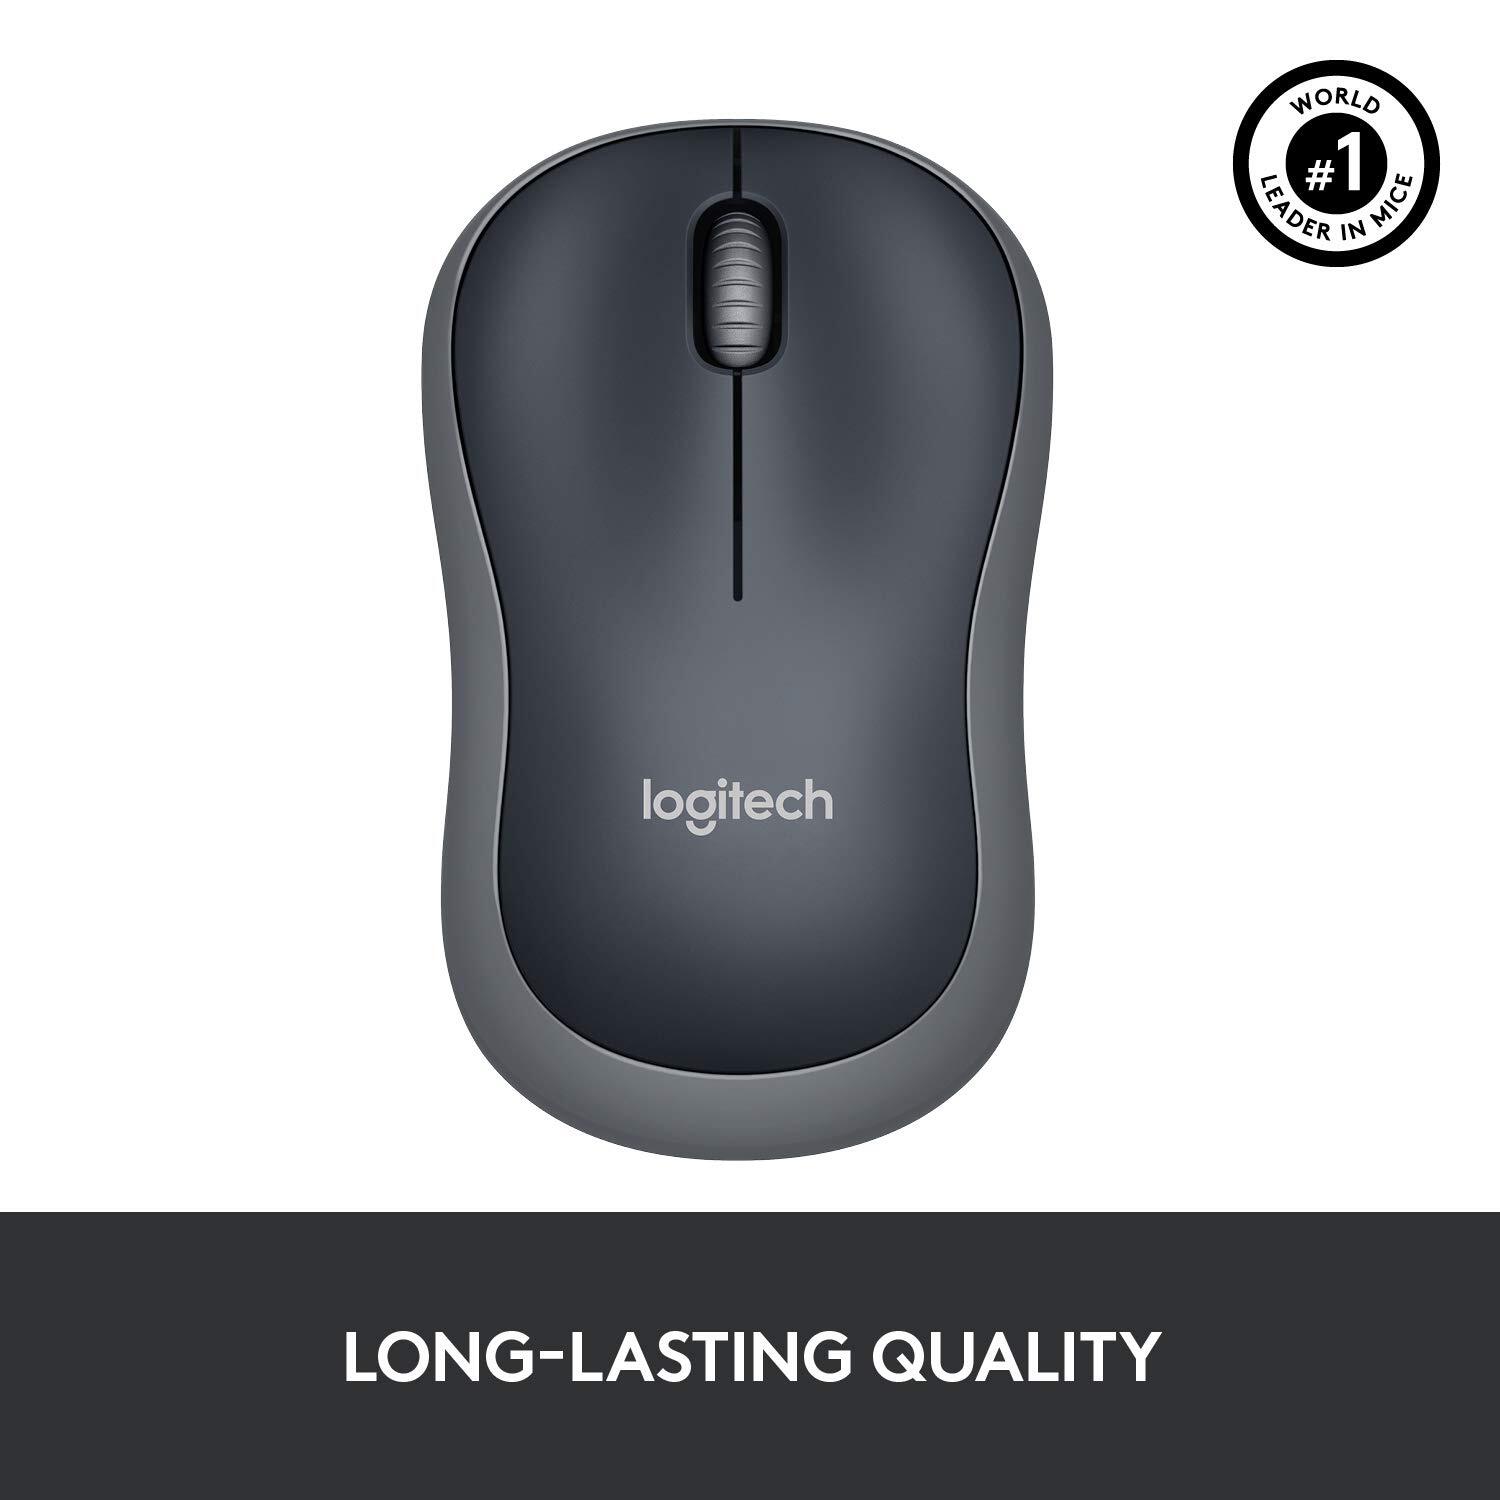 Logitech M185 Wireless Mouse USB for PC Windows, Mac and Linux, Grey with Ambidextrous Design-Black